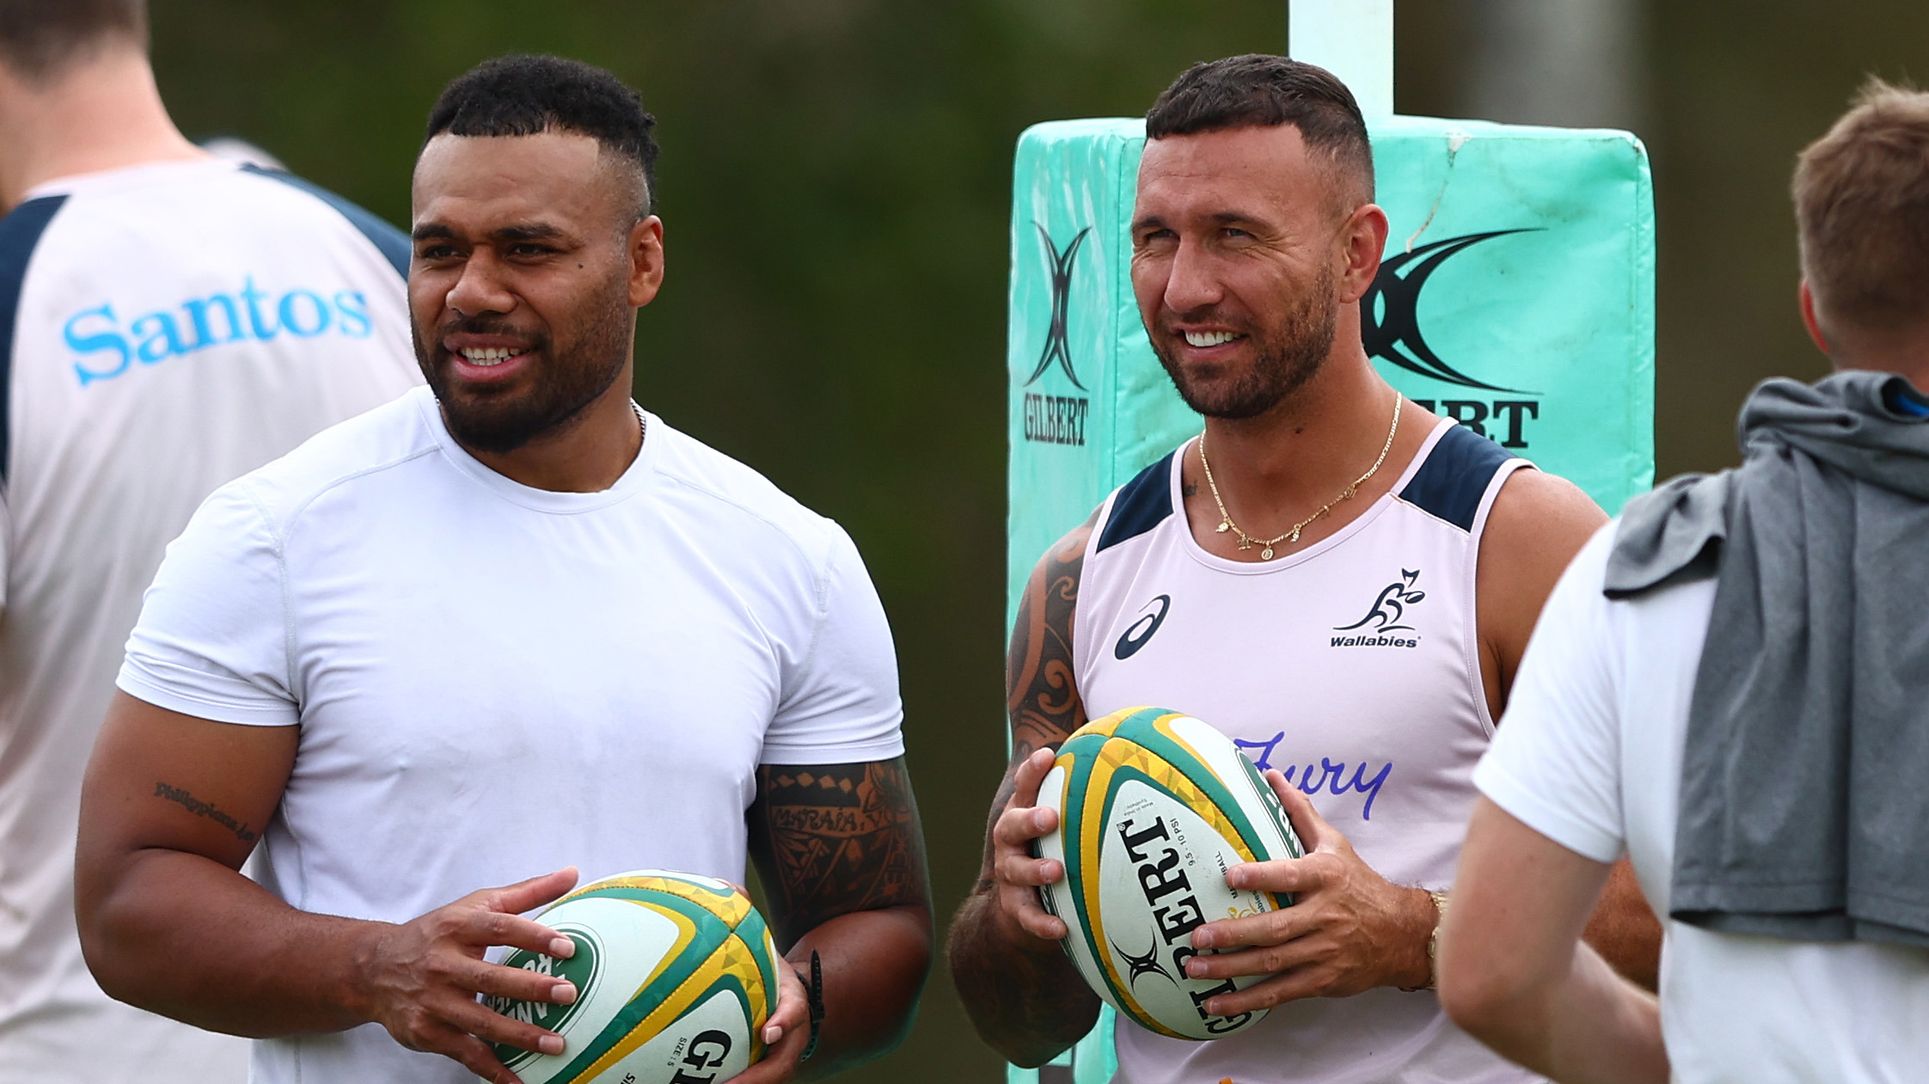 Samu Kerevi and Quade Cooper (right) during the recent Wallabies training camp at Sanctuary Cove.